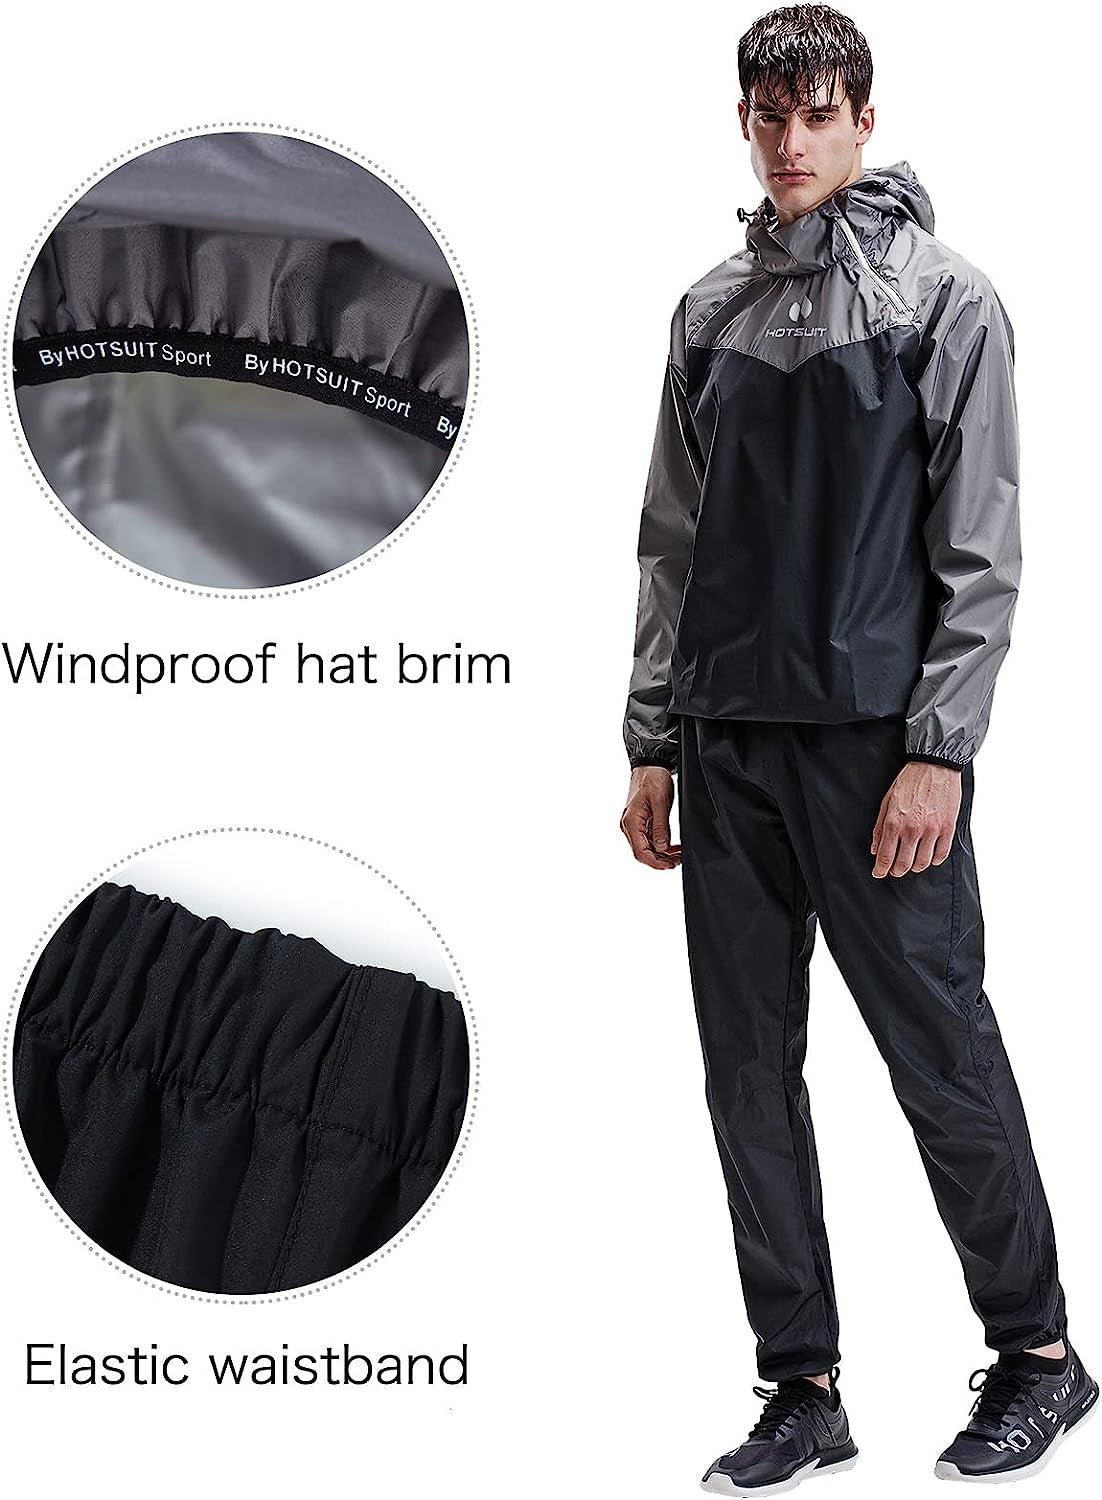 "Get Fit Faster with the Ultimate Men's Sauna Suit for Intense Gym Sweating"